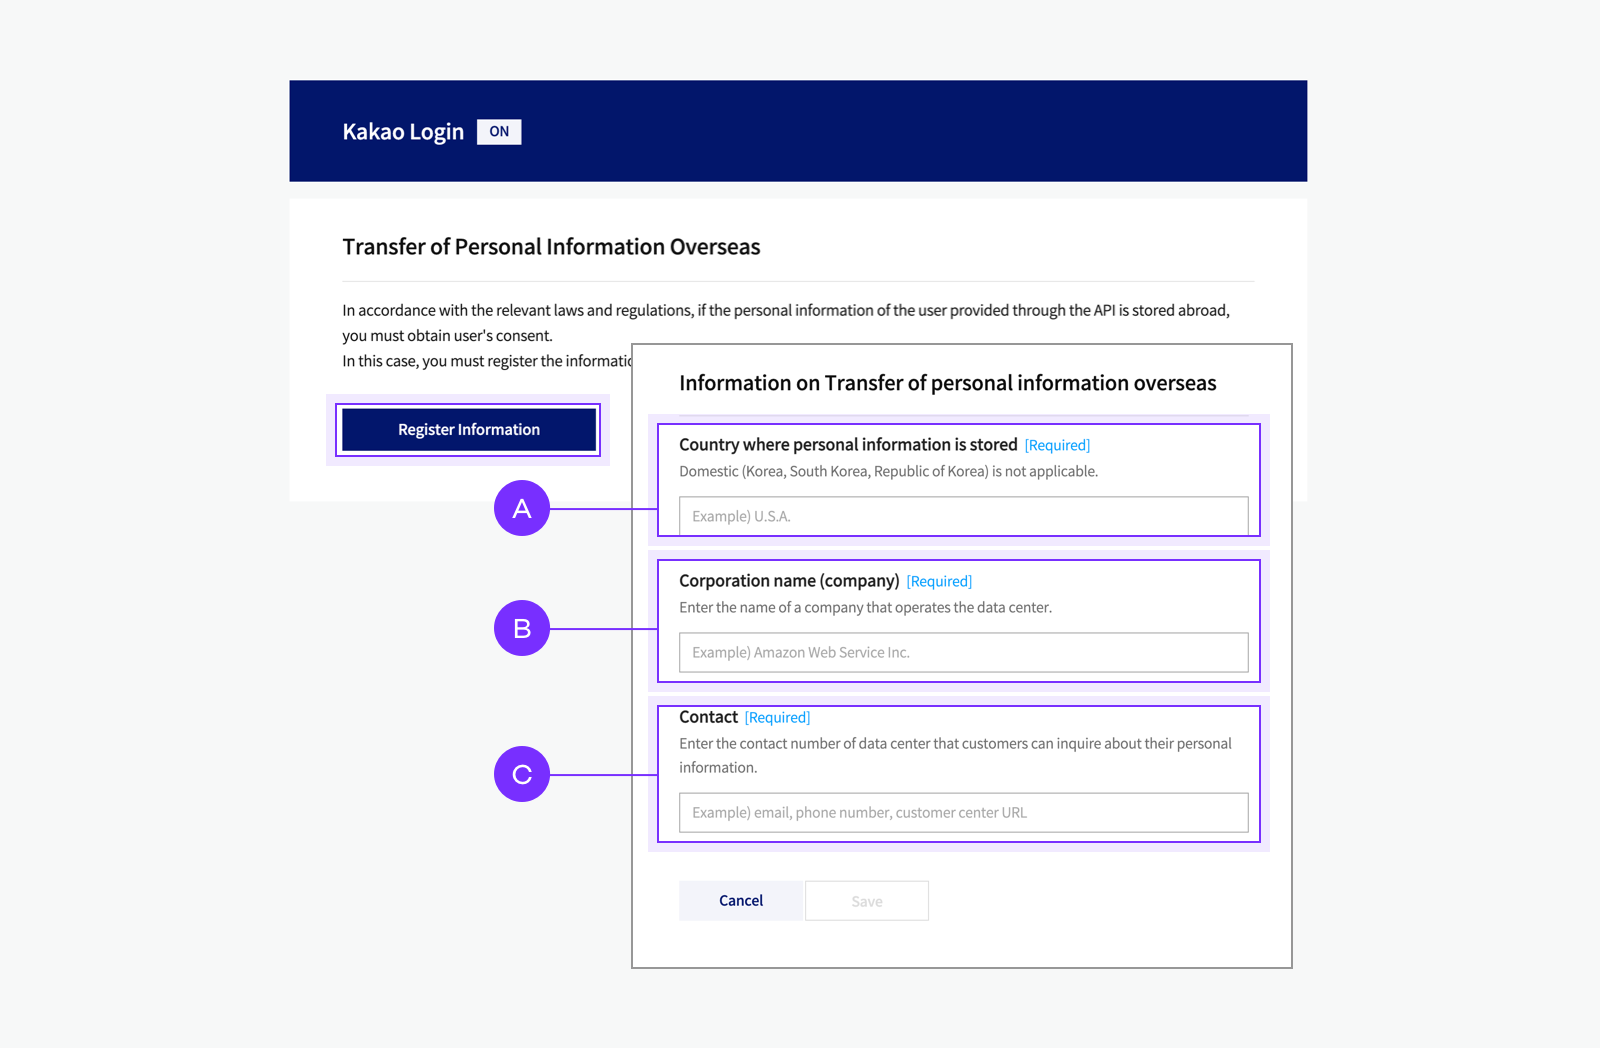 How to register information related to the transfer of personal information overseas